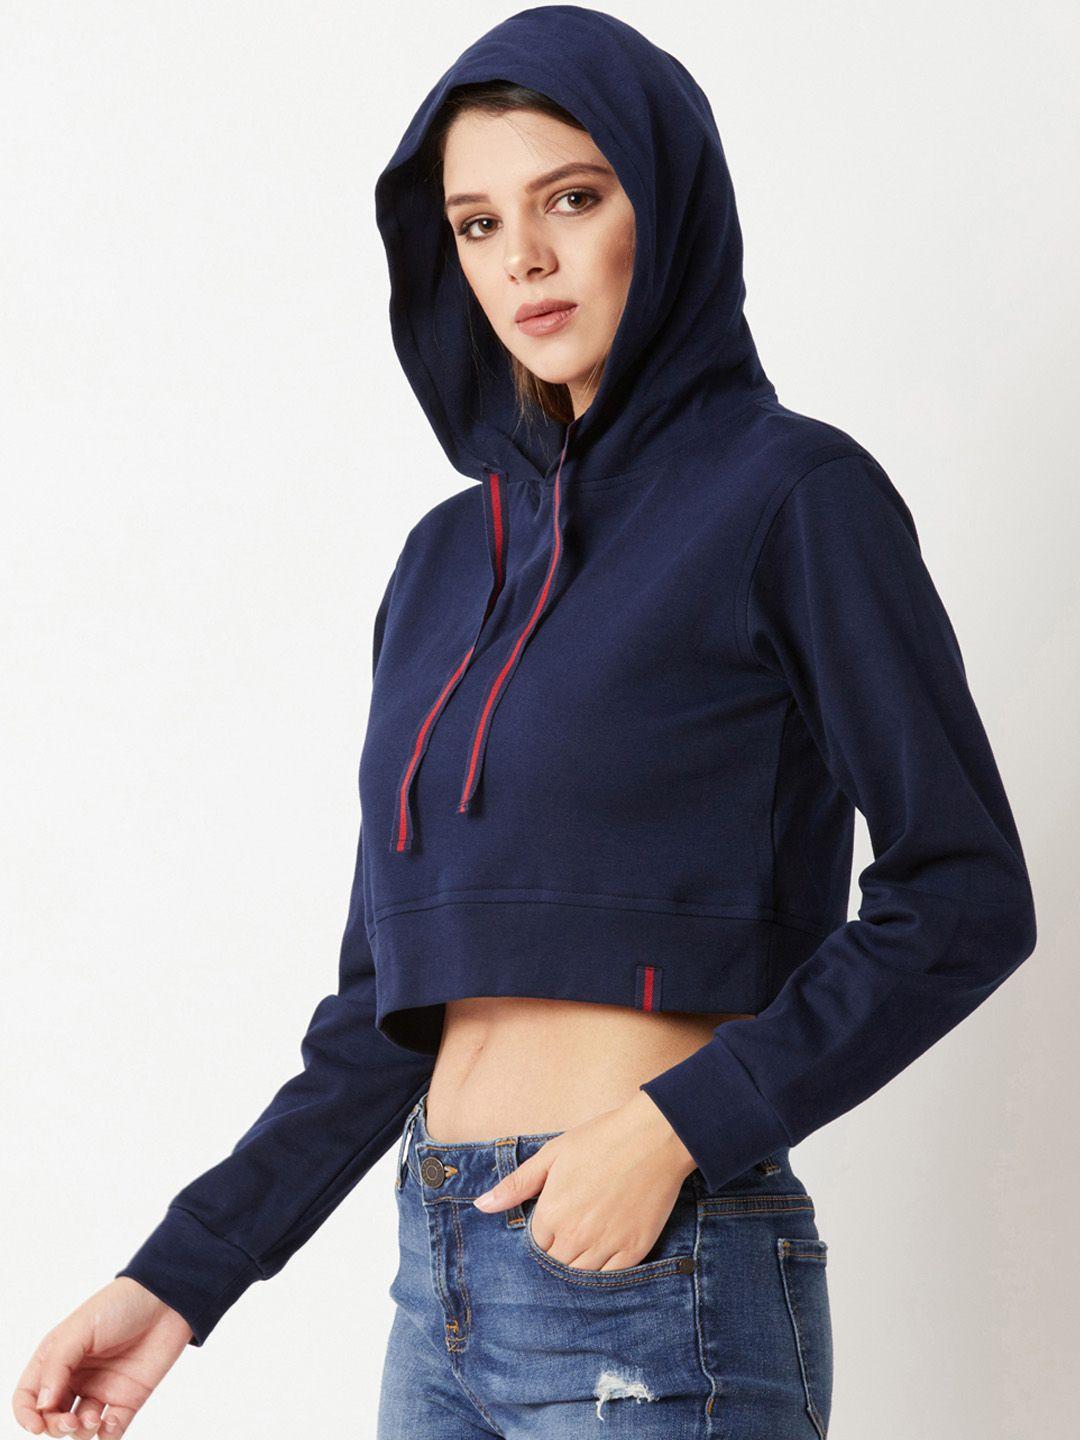 miss-chase-women-navy-blue-solid-hooded-sweatshirt